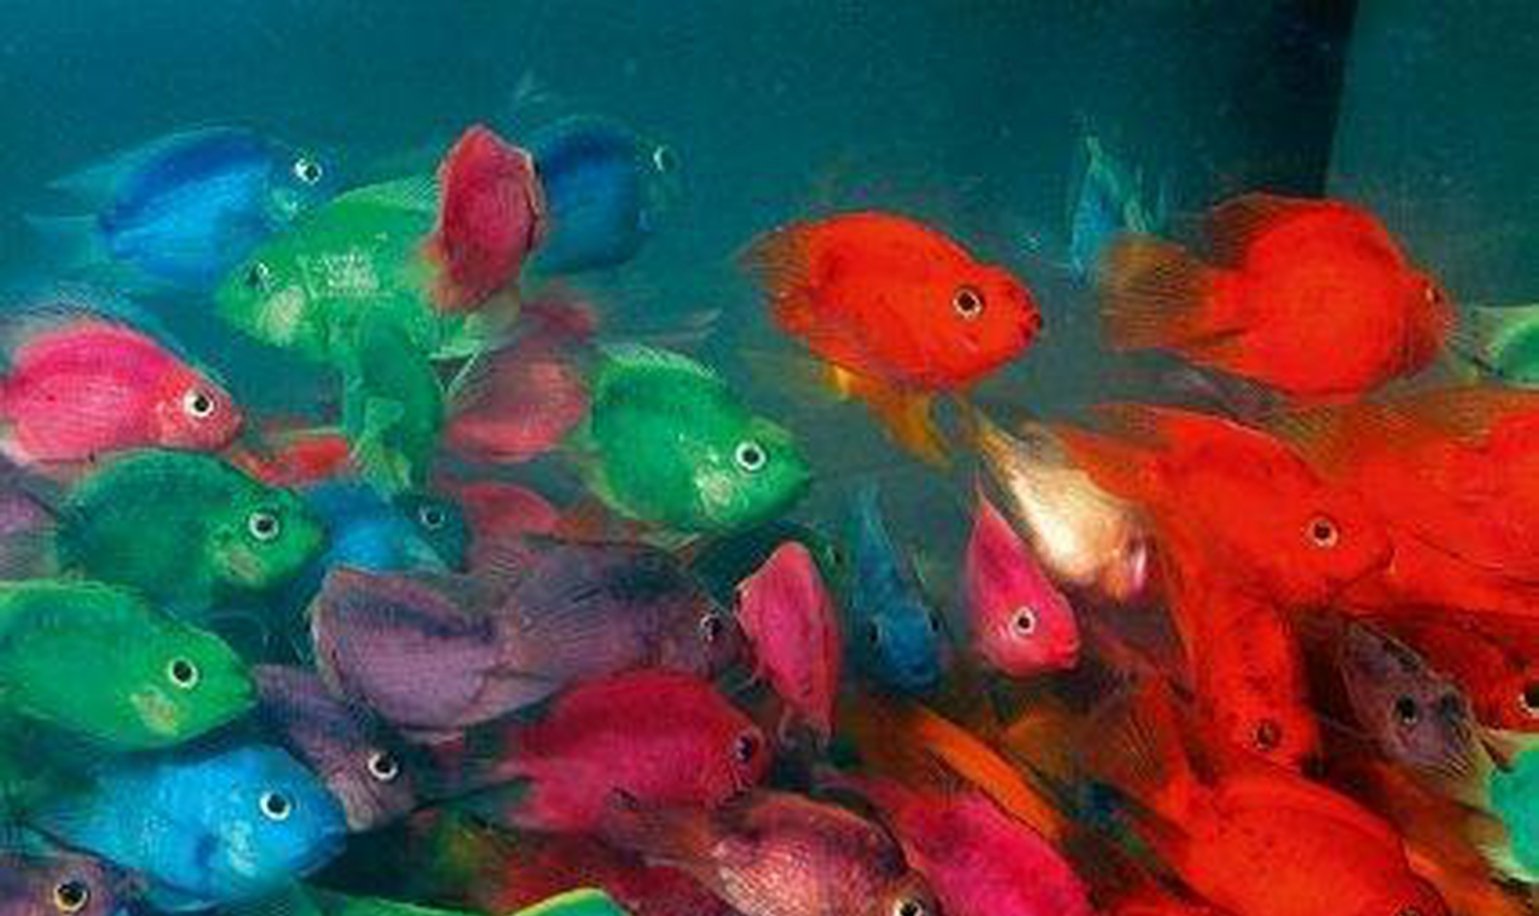 X5 Assorted Jellybean Parrot Cichlid / +1 Free (Total 6) - Freshwater Fish Live-Freshwater Fish Package-www.YourFishStore.com